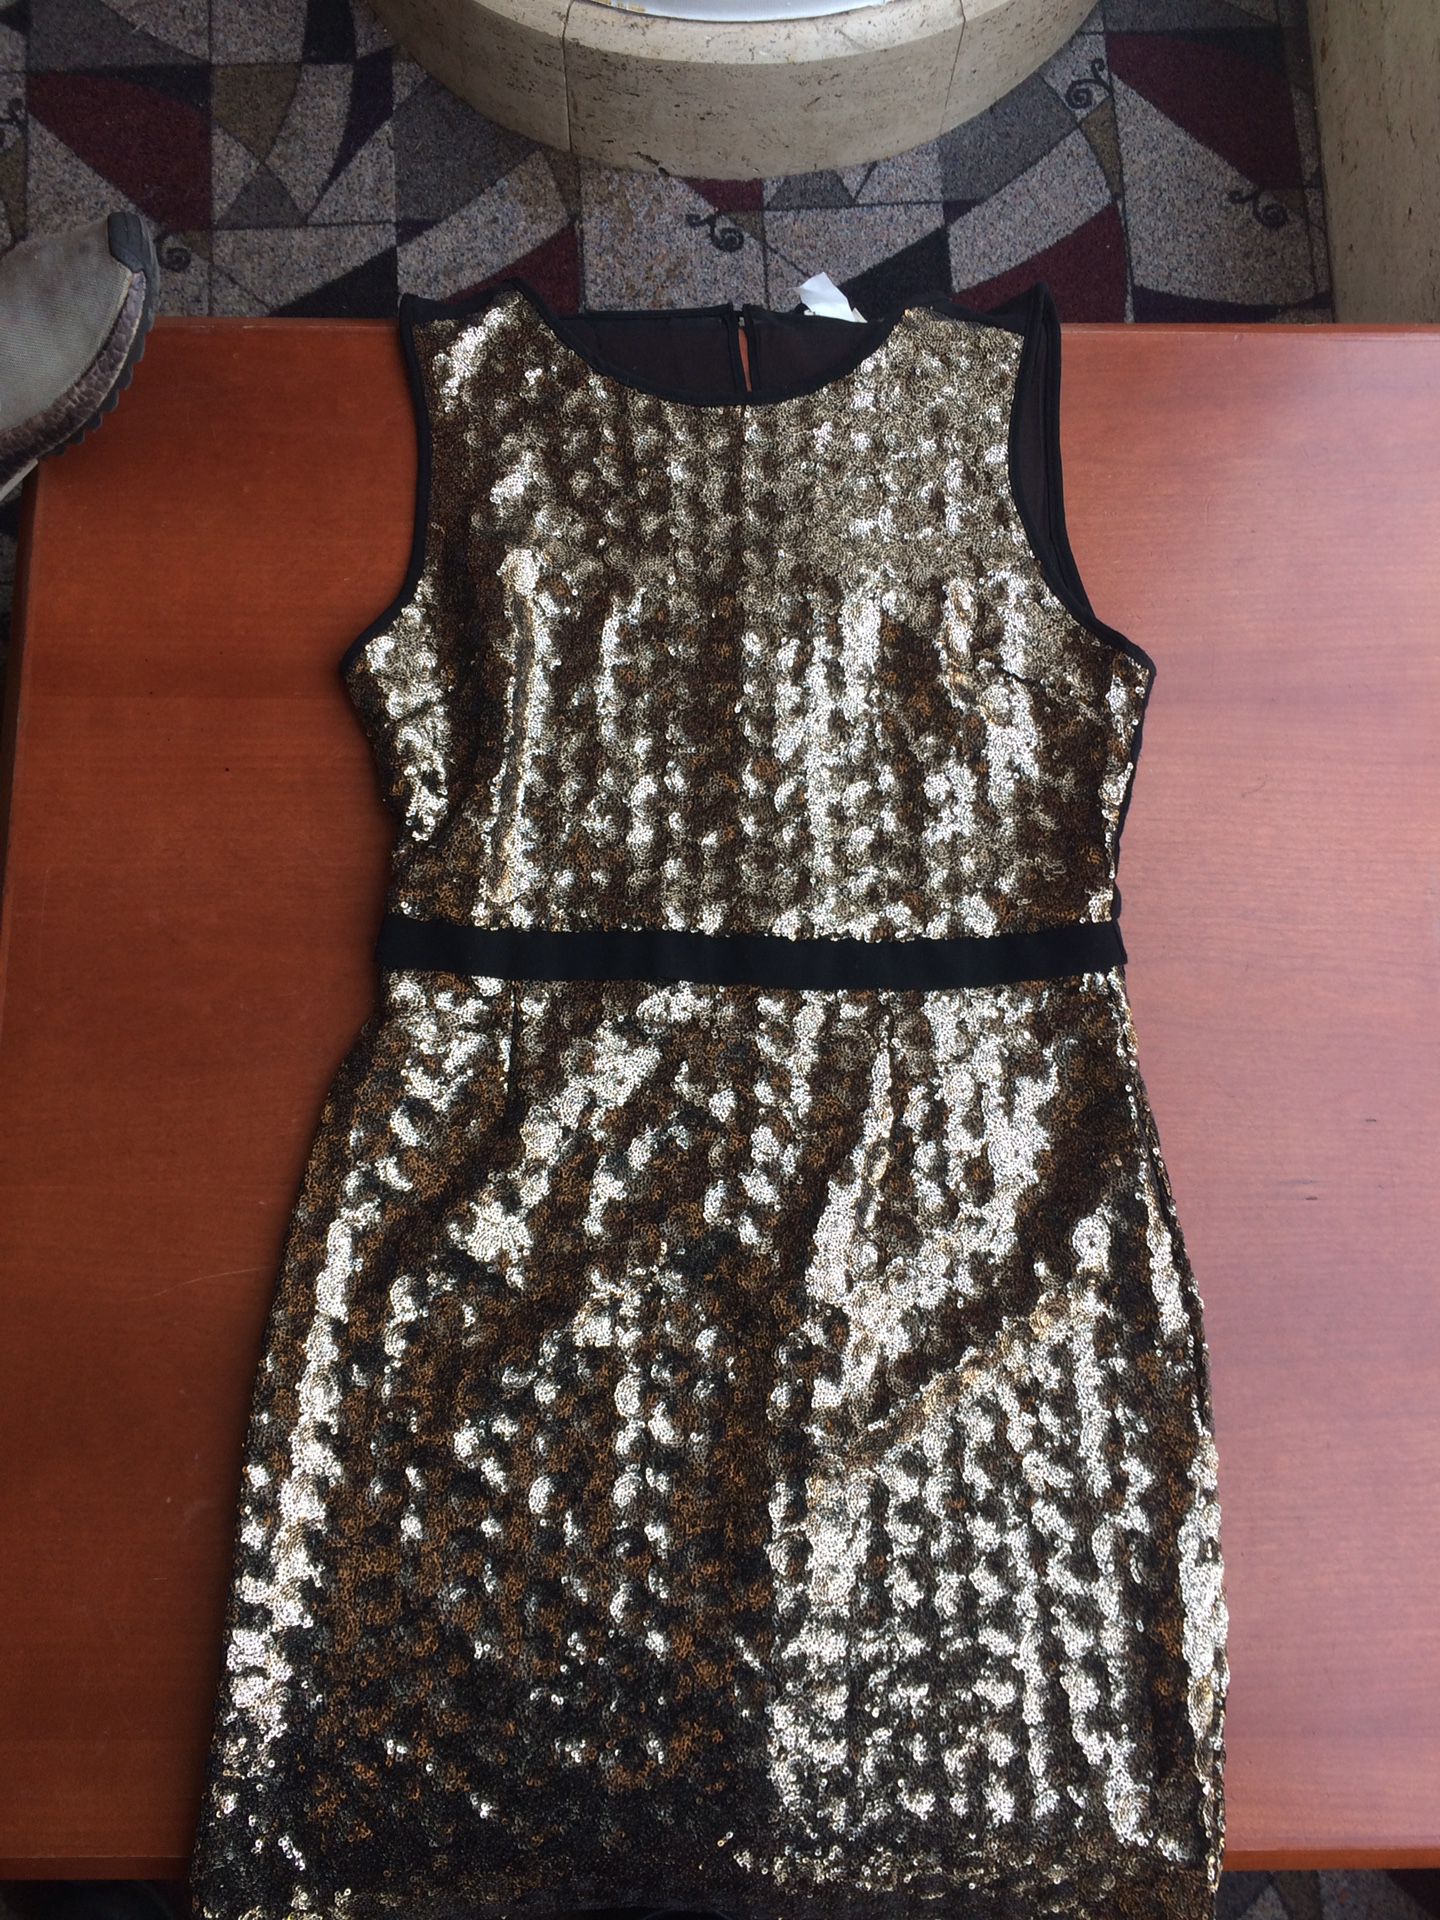 Sparkly Gold sequin sheath dress. Size large.